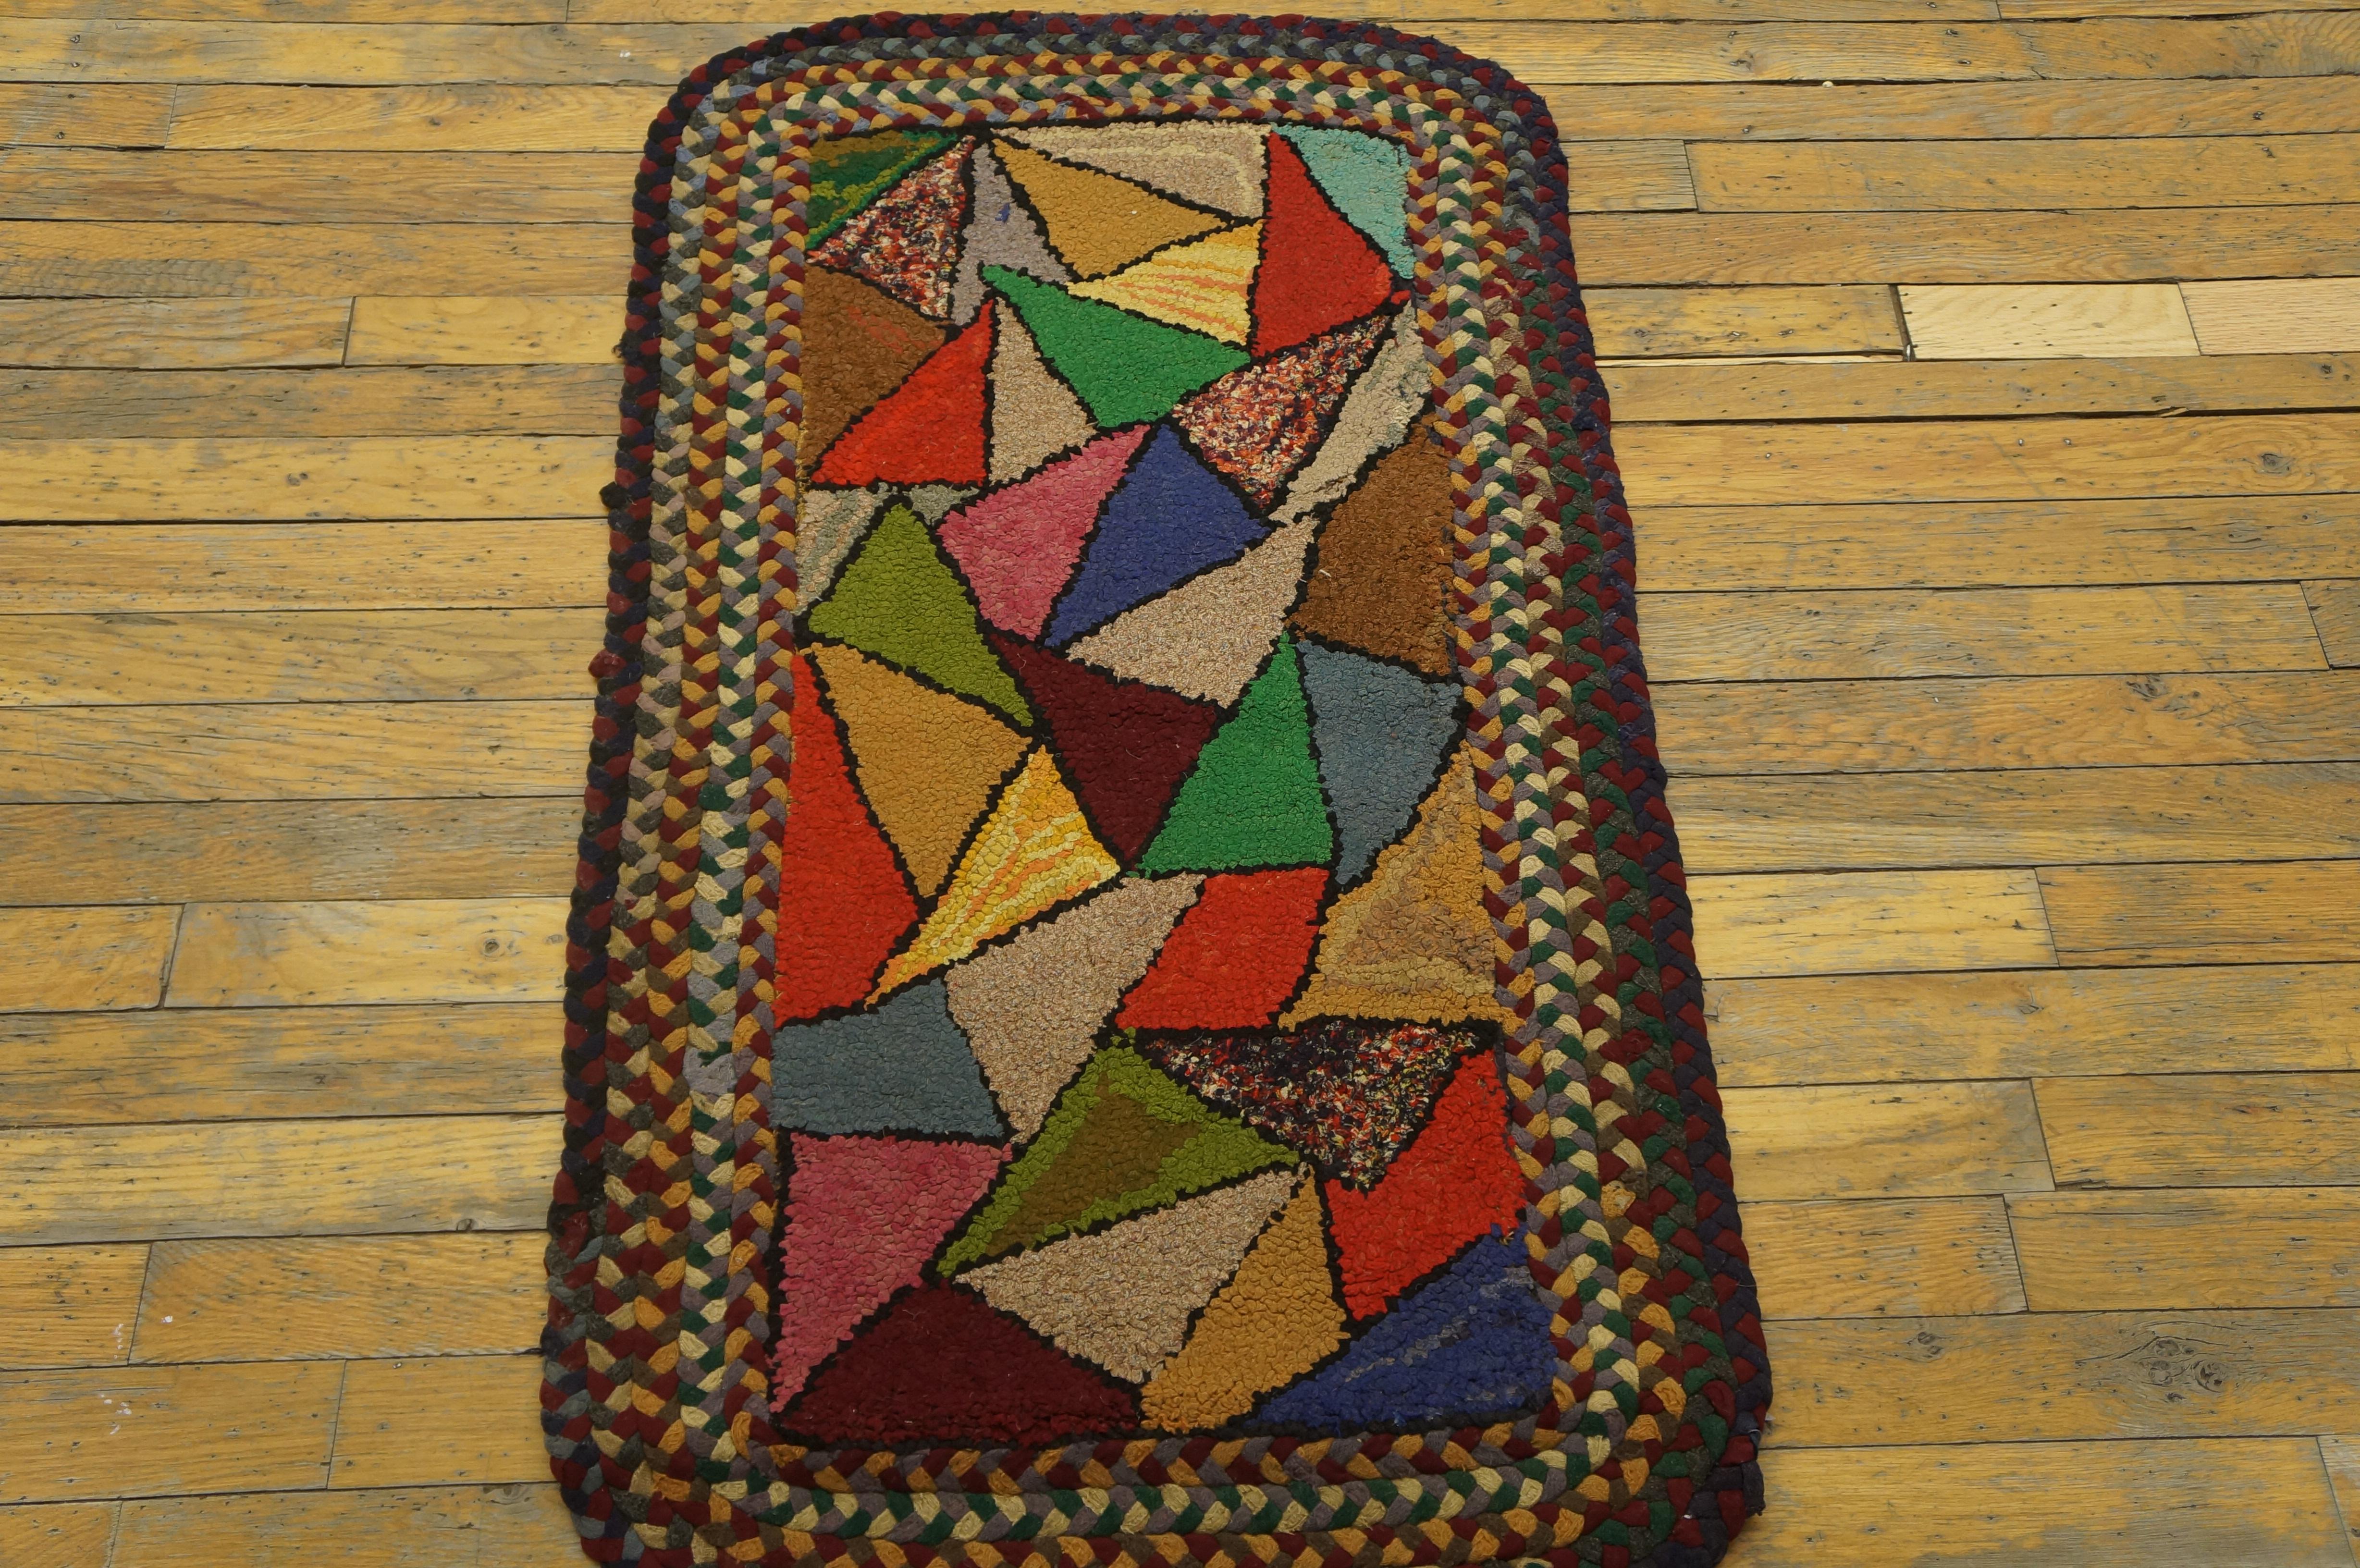 Antique American Hooked rug, size: 1'10